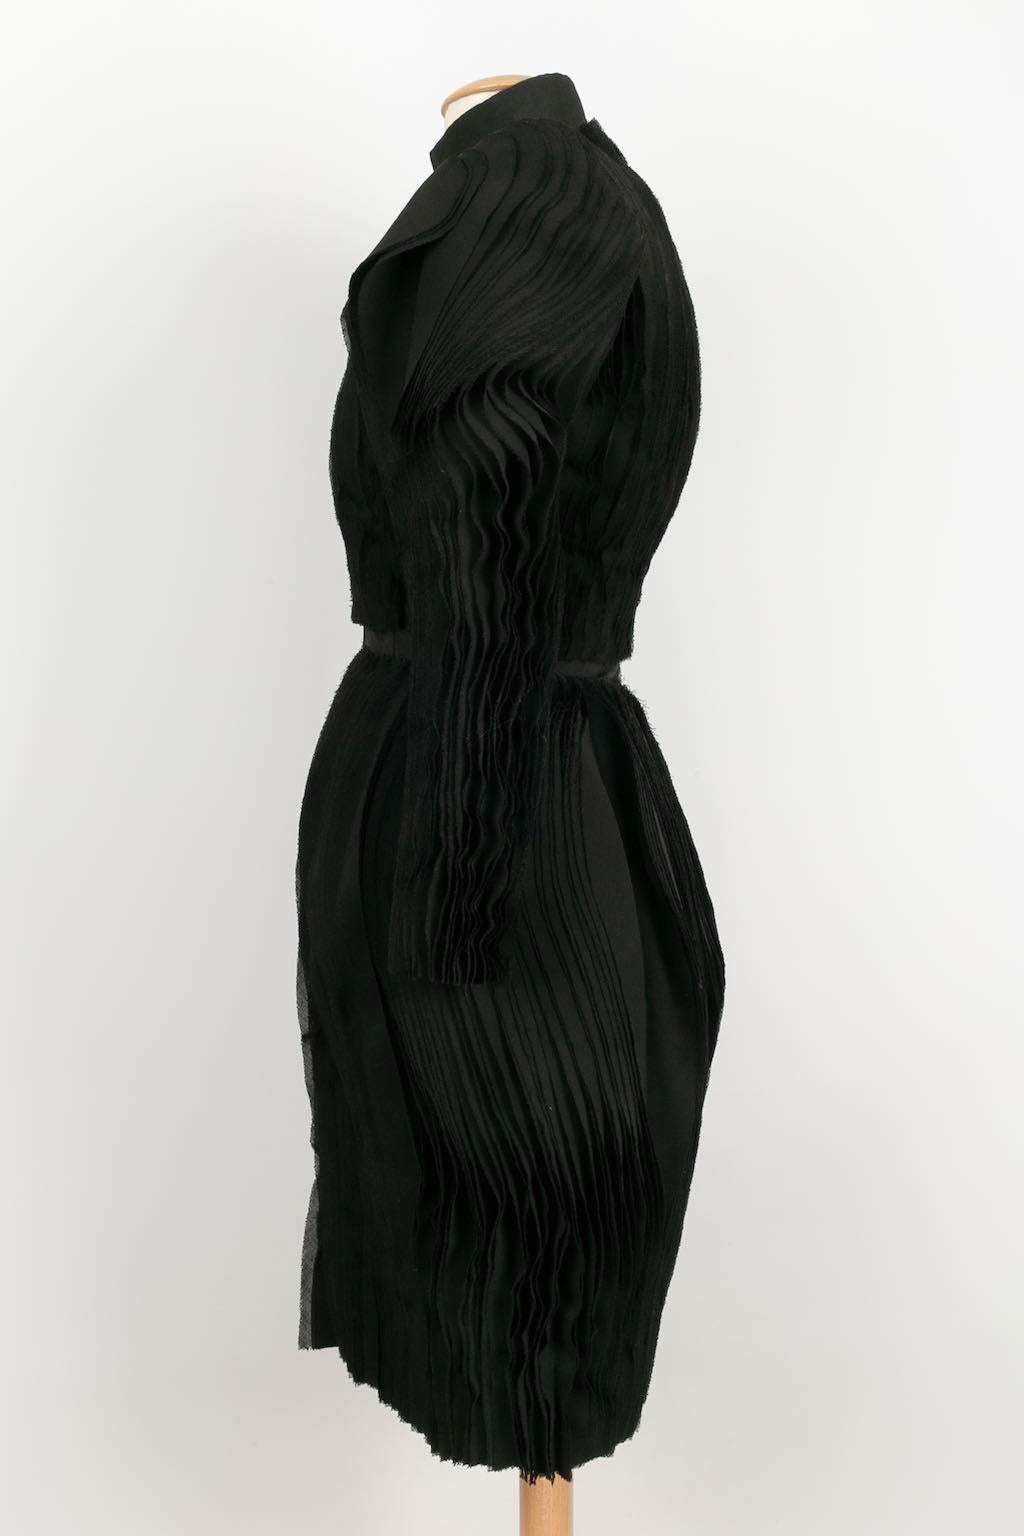 Jean-Paul Gaultier -Black canvas dress sewn with strips of tapered fabric giving incredible volume to the piece. No size or composition label, it fits a size 36FR. Fall-Winter 2014 Couture Collection.

Additional information: 
Dimensions: 
Shoulder